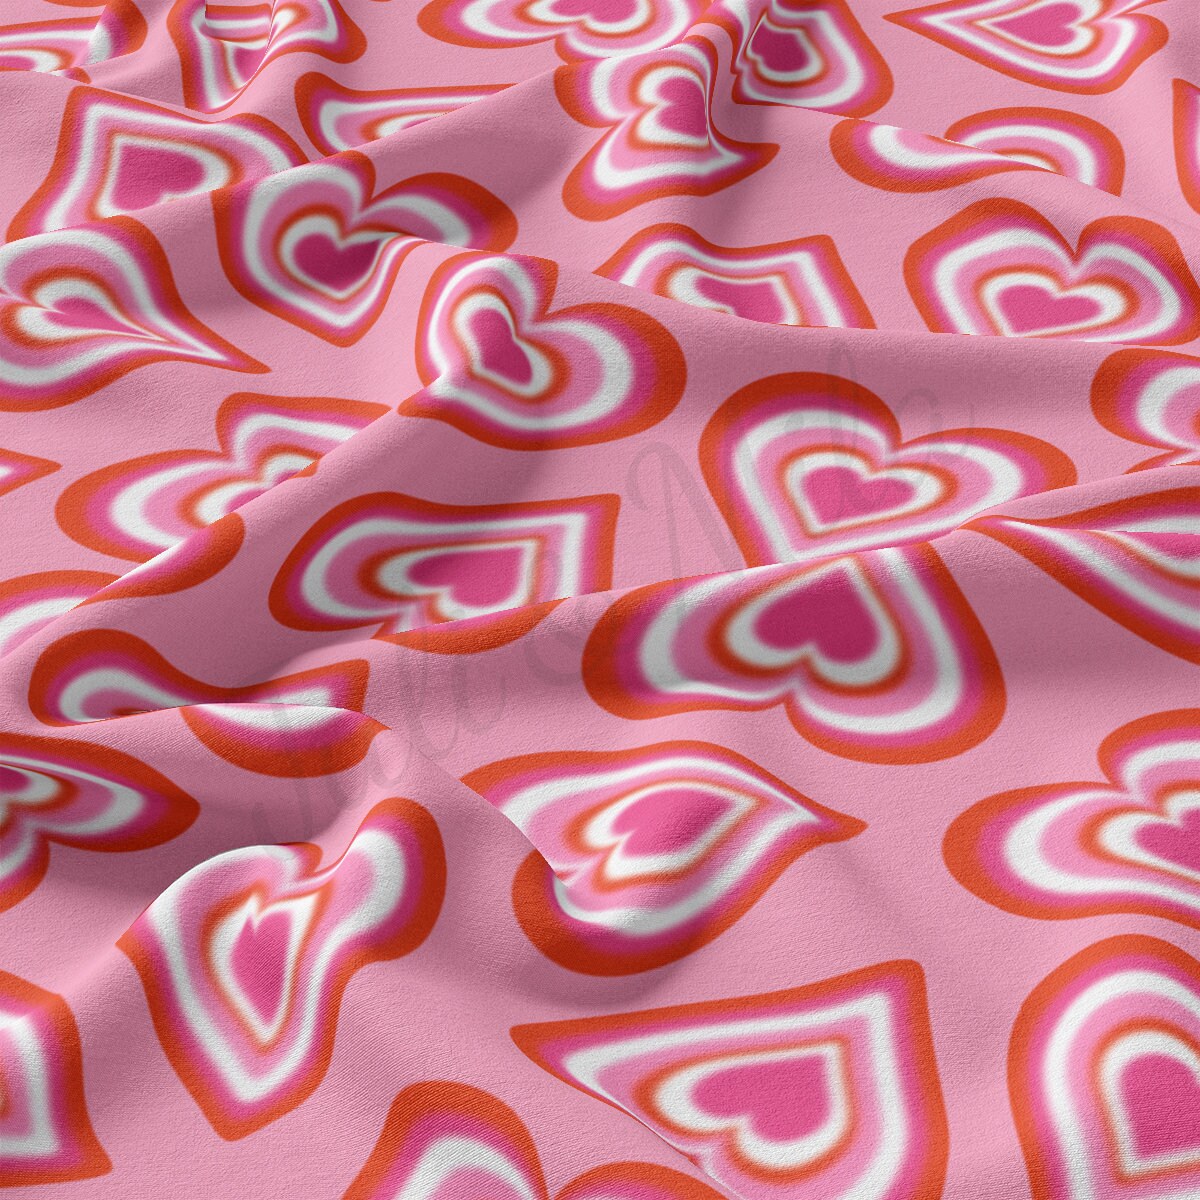 DBP Fabric Double Brushed Polyester DBP2307 Valentine's Day